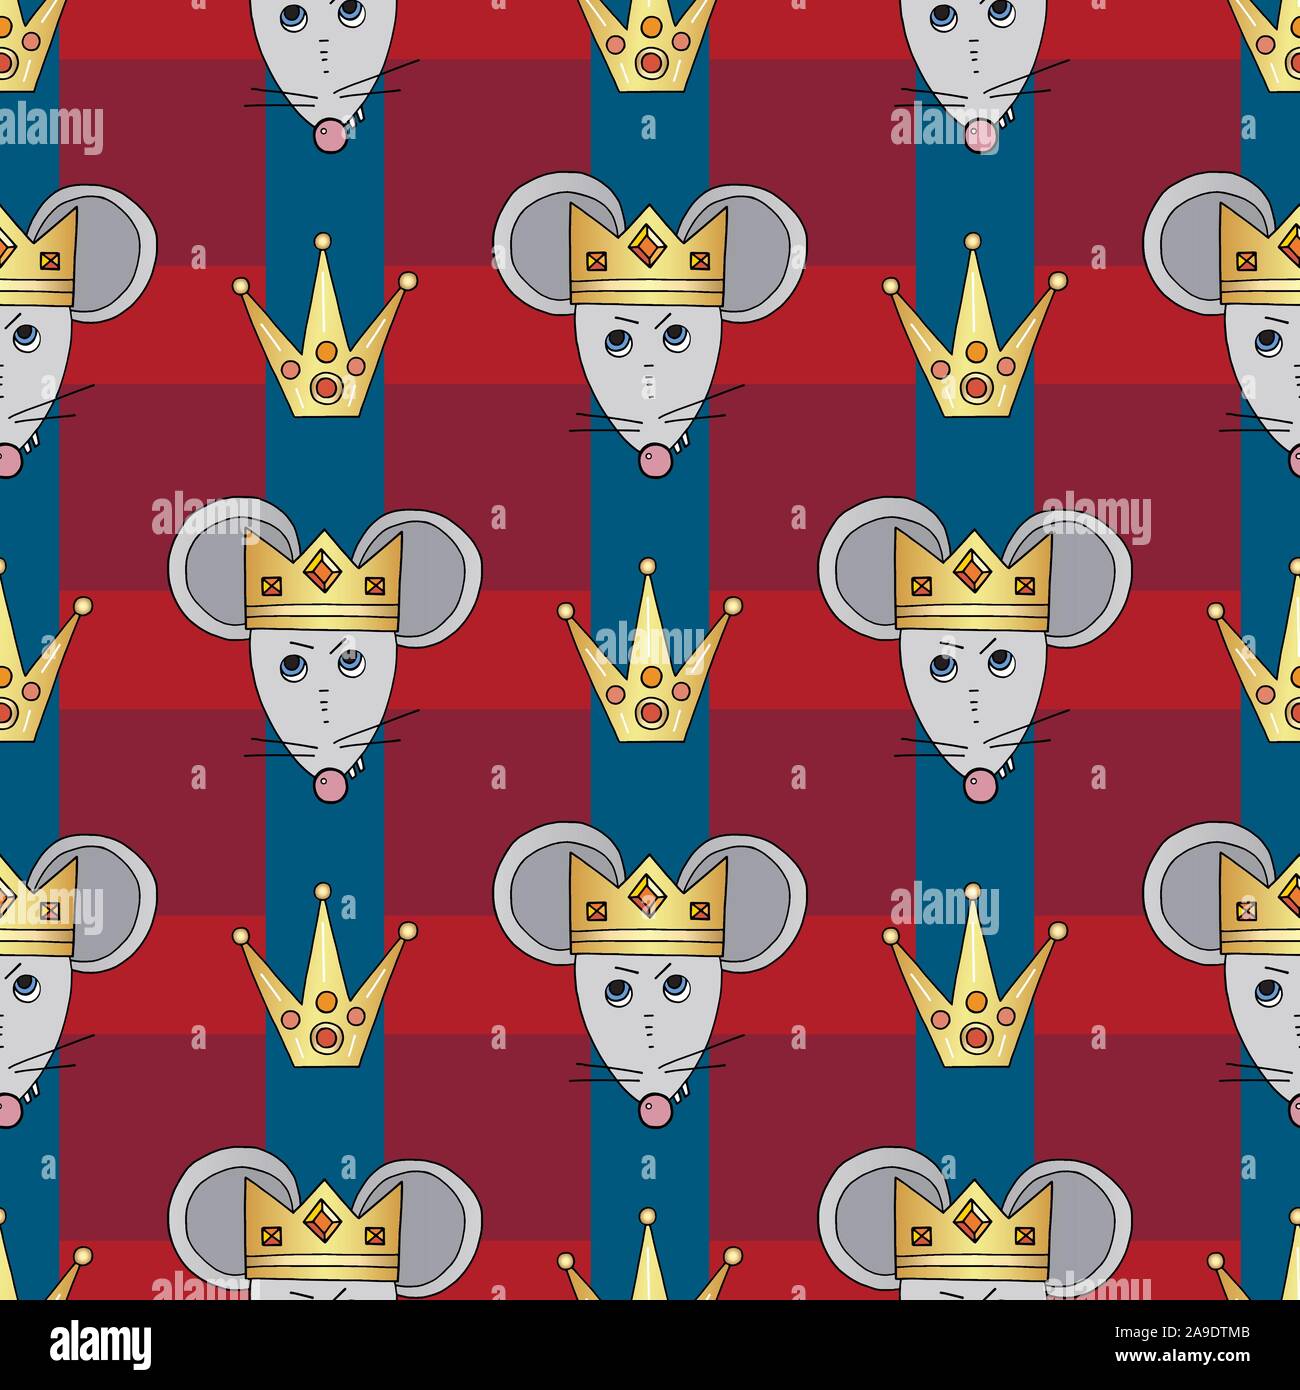 Rat king character vector seamless pattern. Mouse prince animal with crown. Happy New Year symbol of 2020. Hand drawn cartoon cute pets background. Stock Vector